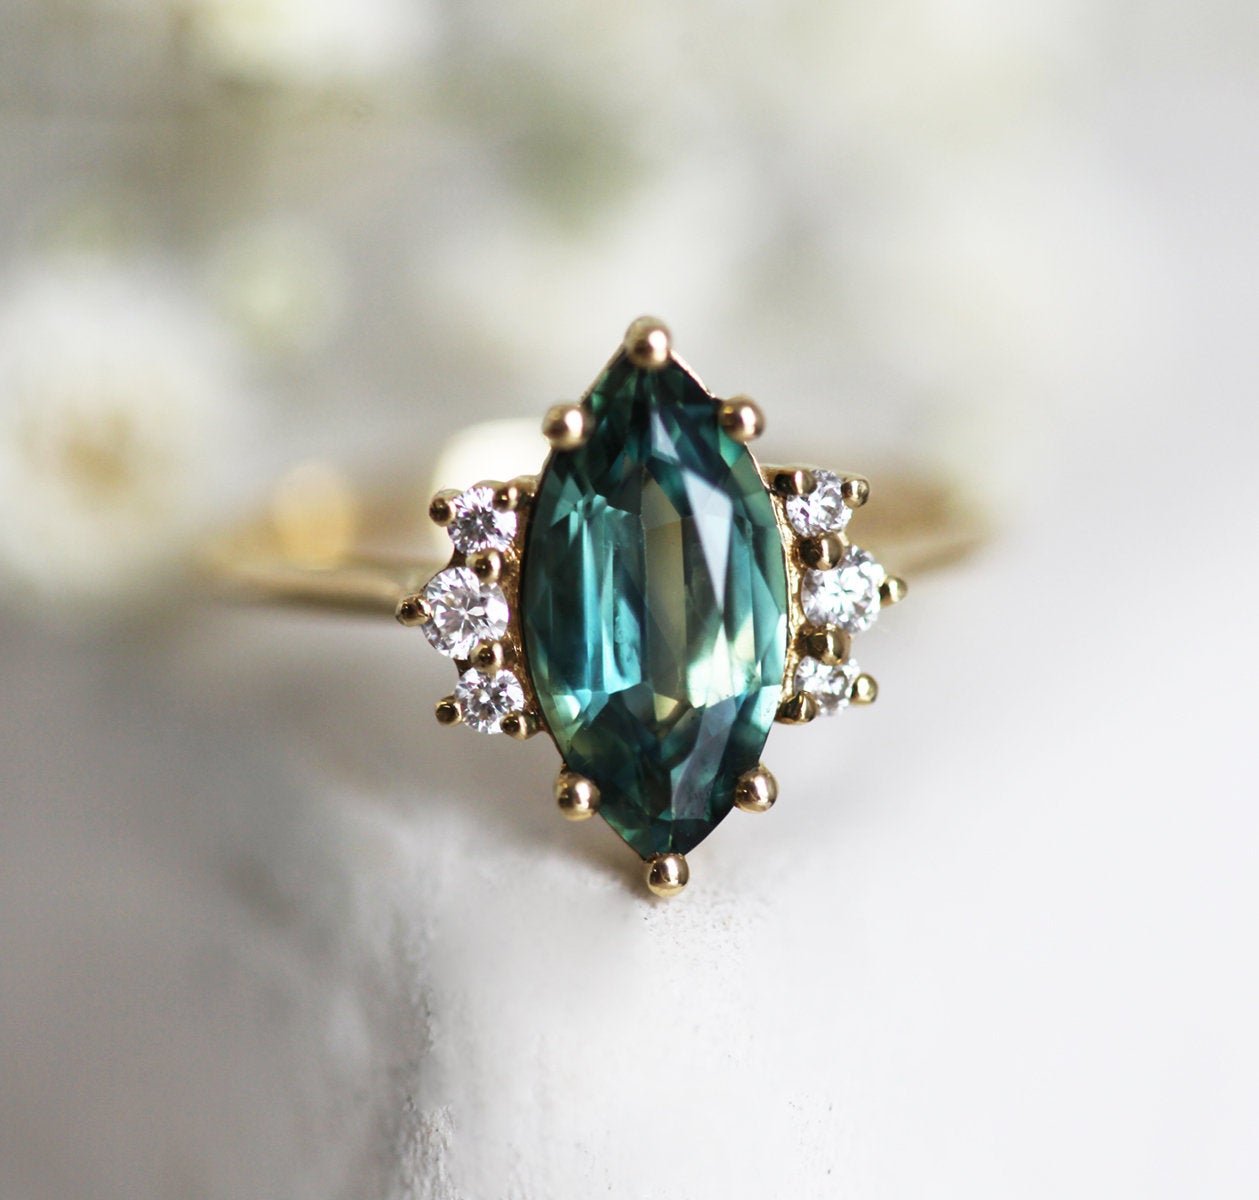 Marquise-cut teal sapphire cluster ring with white diamonds